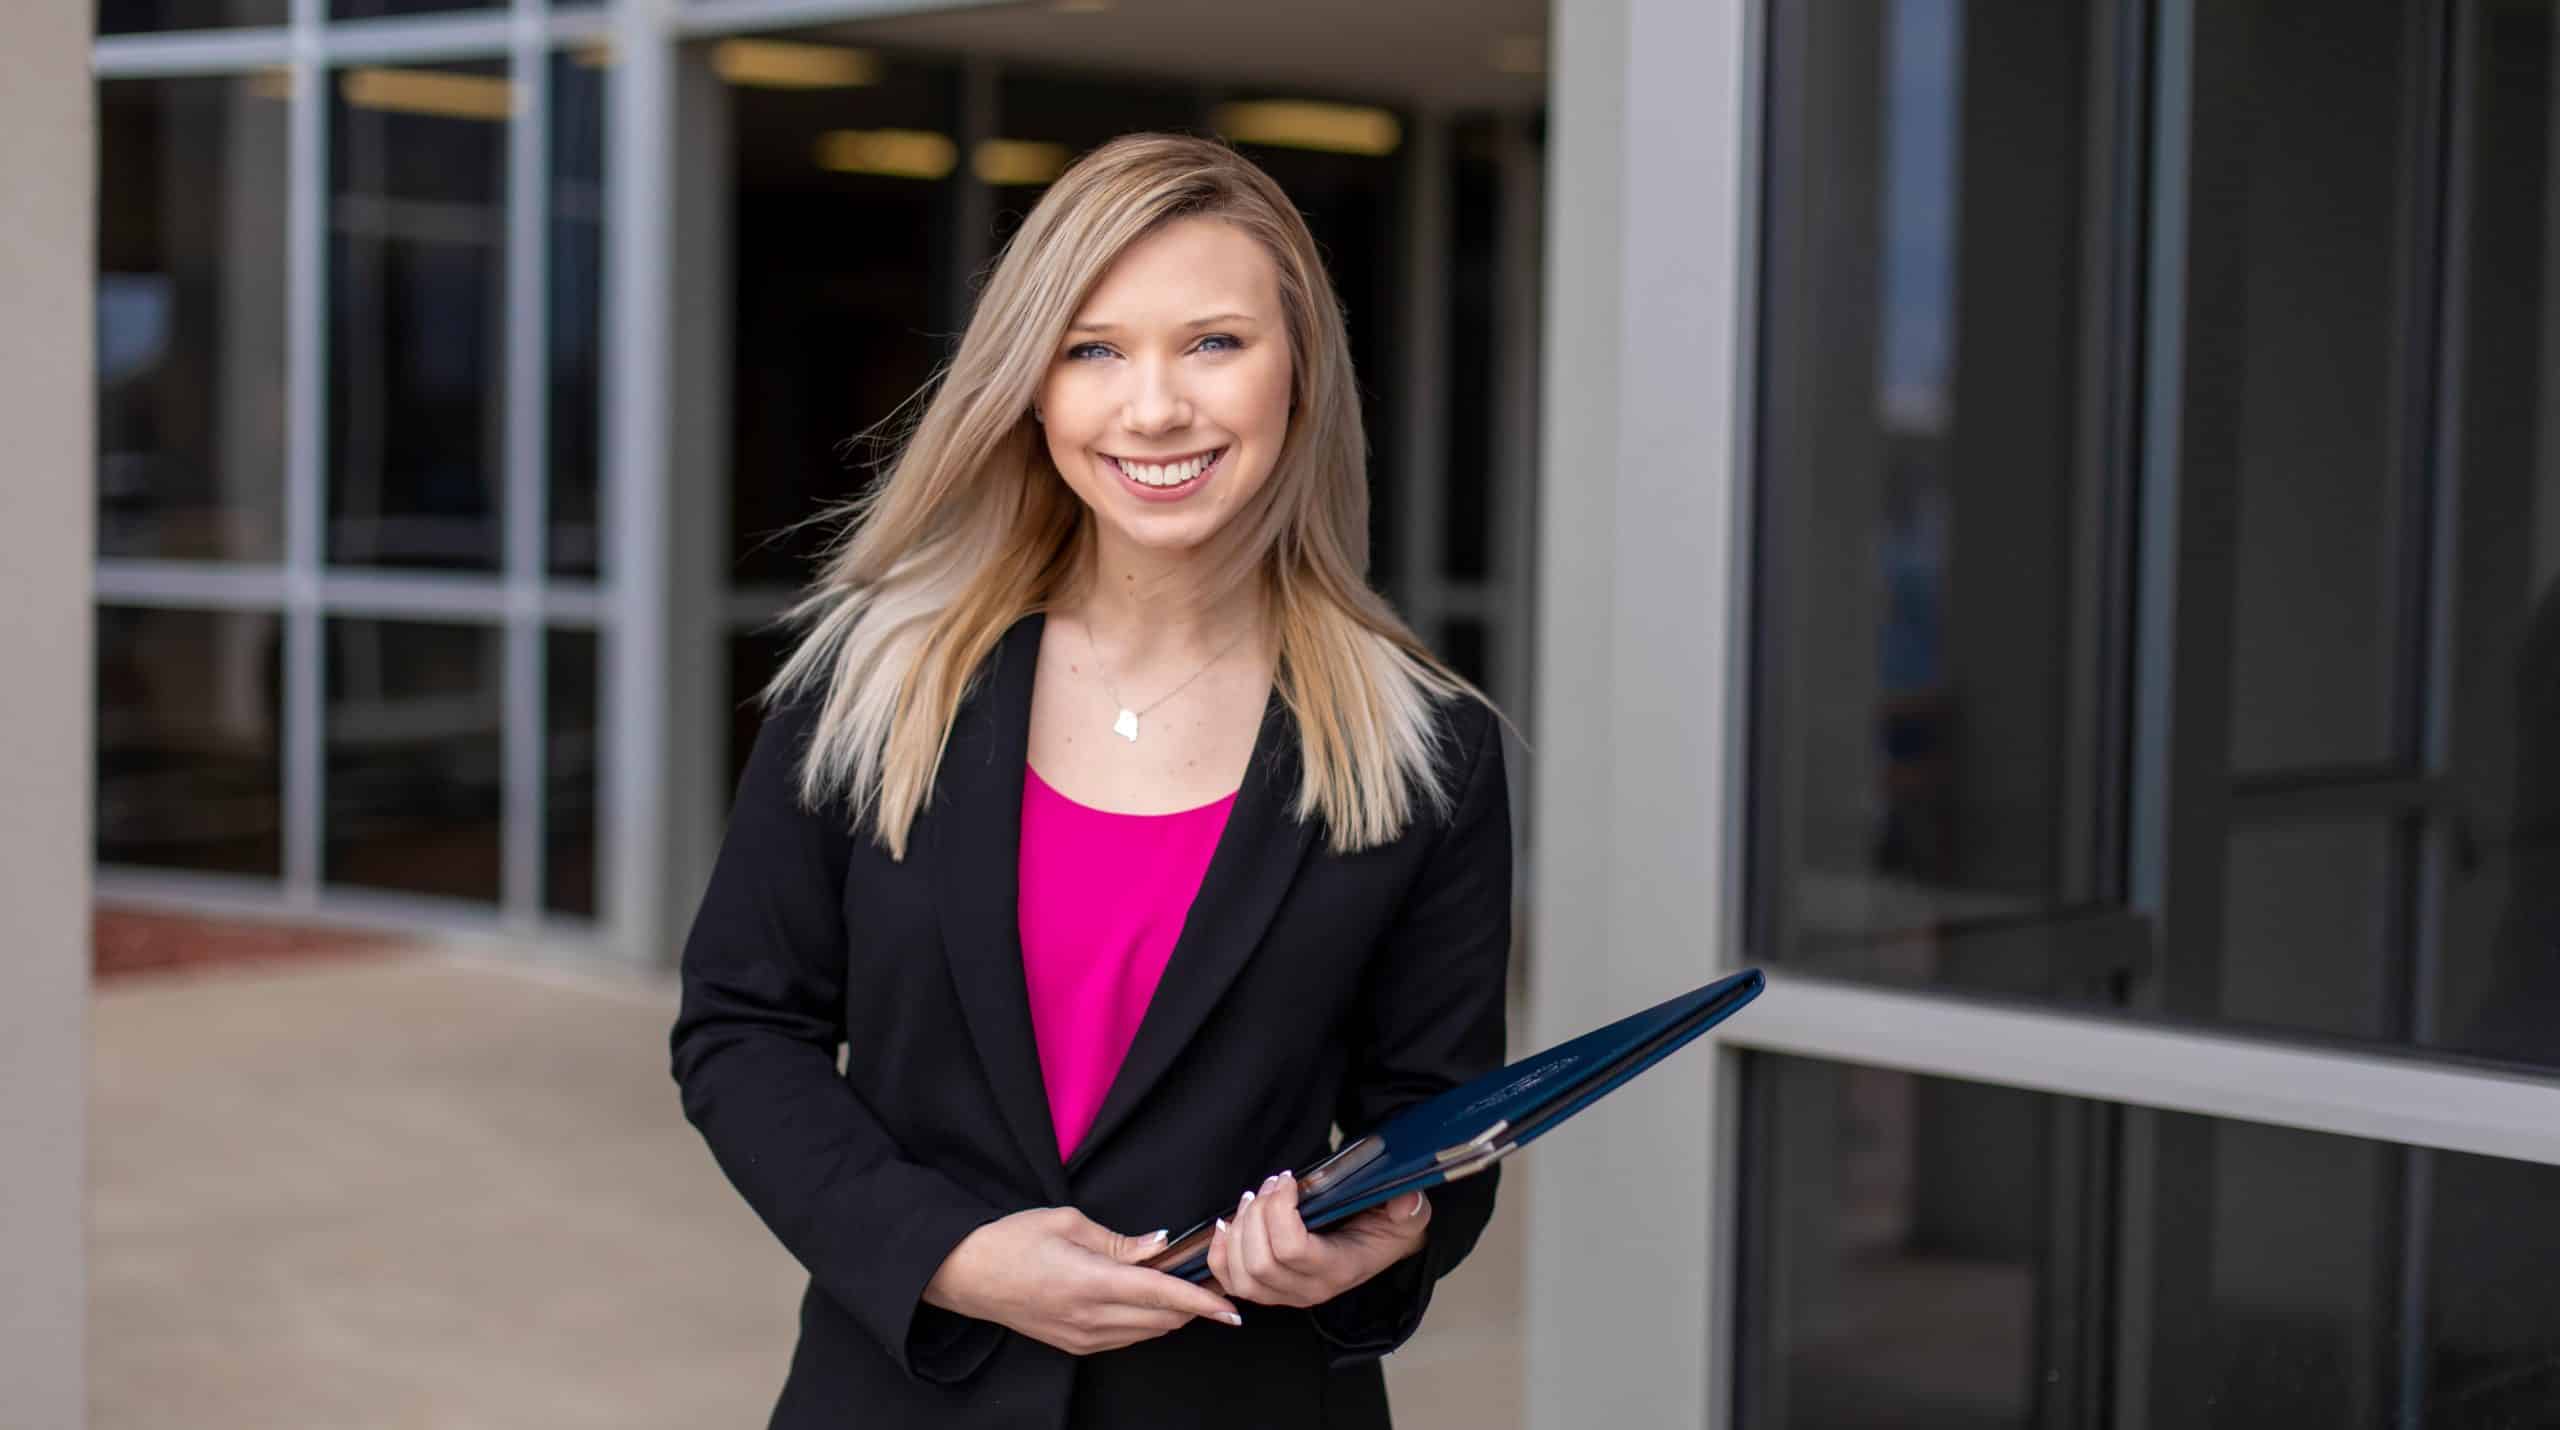 Student dressed in business professional attire, smiling at the camera.